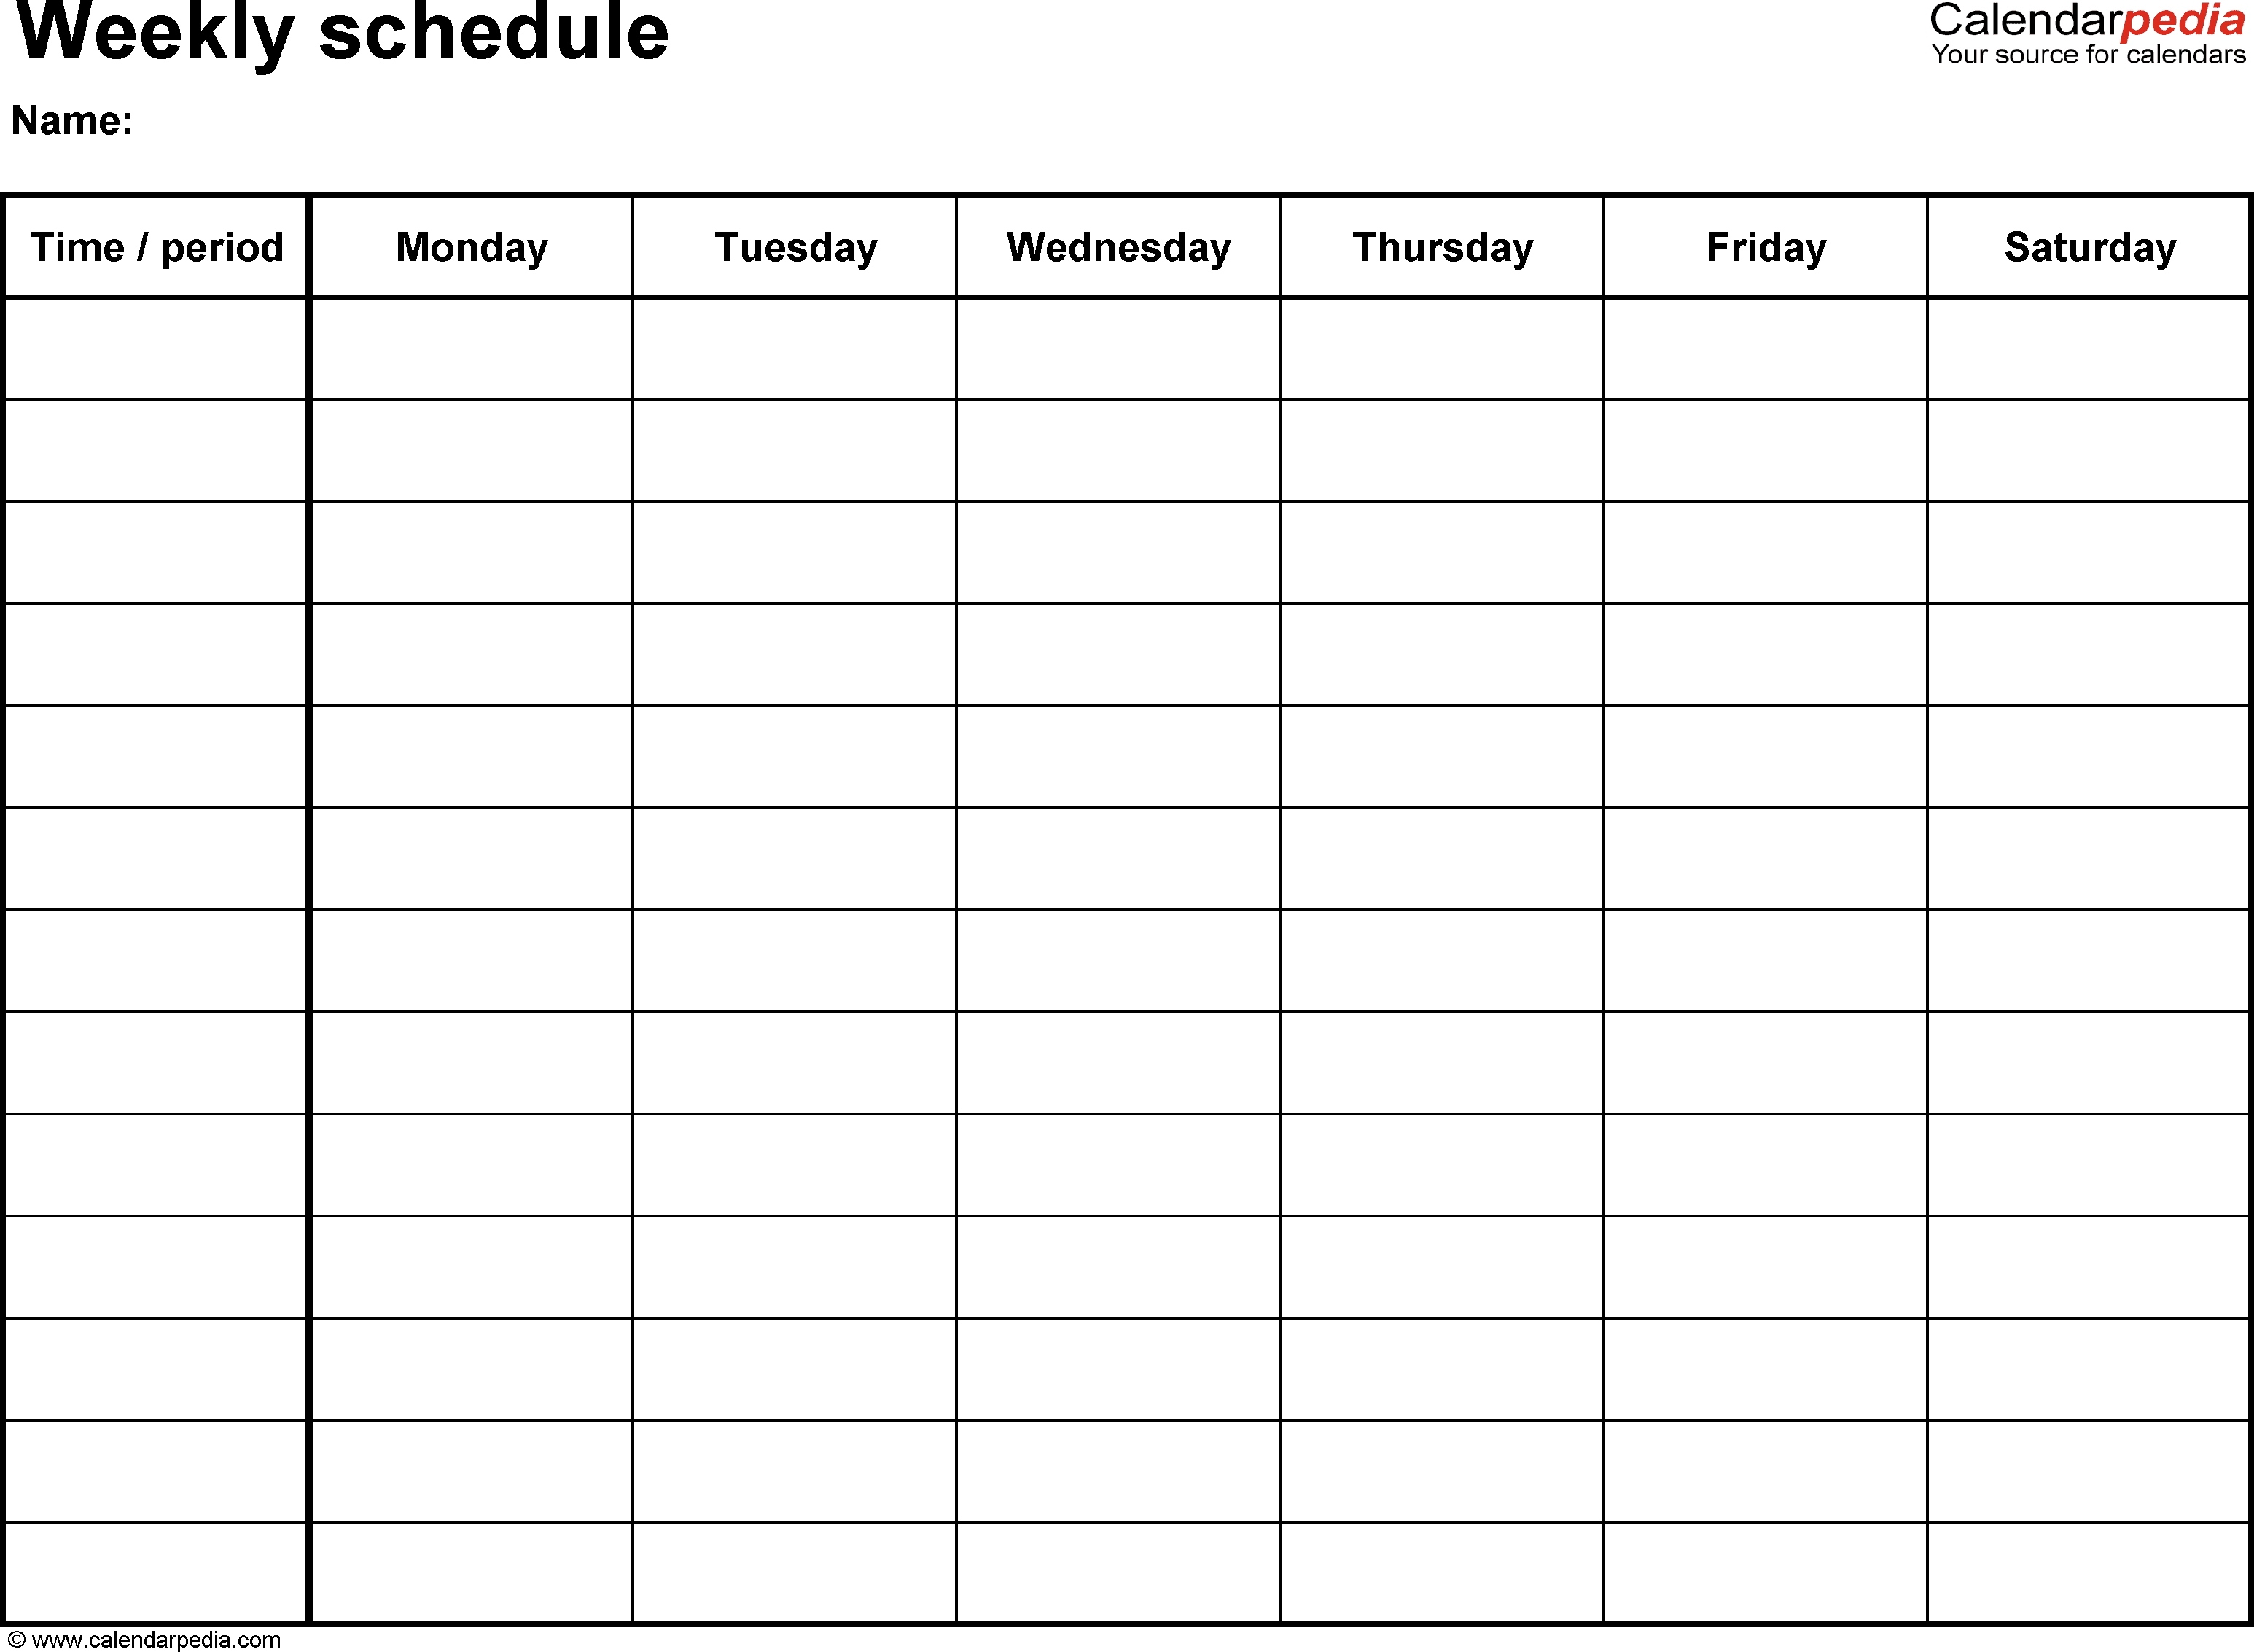 Free Weekly Schedule Templates For Word - 18 Templates in Free Calendars Monday To Sunday